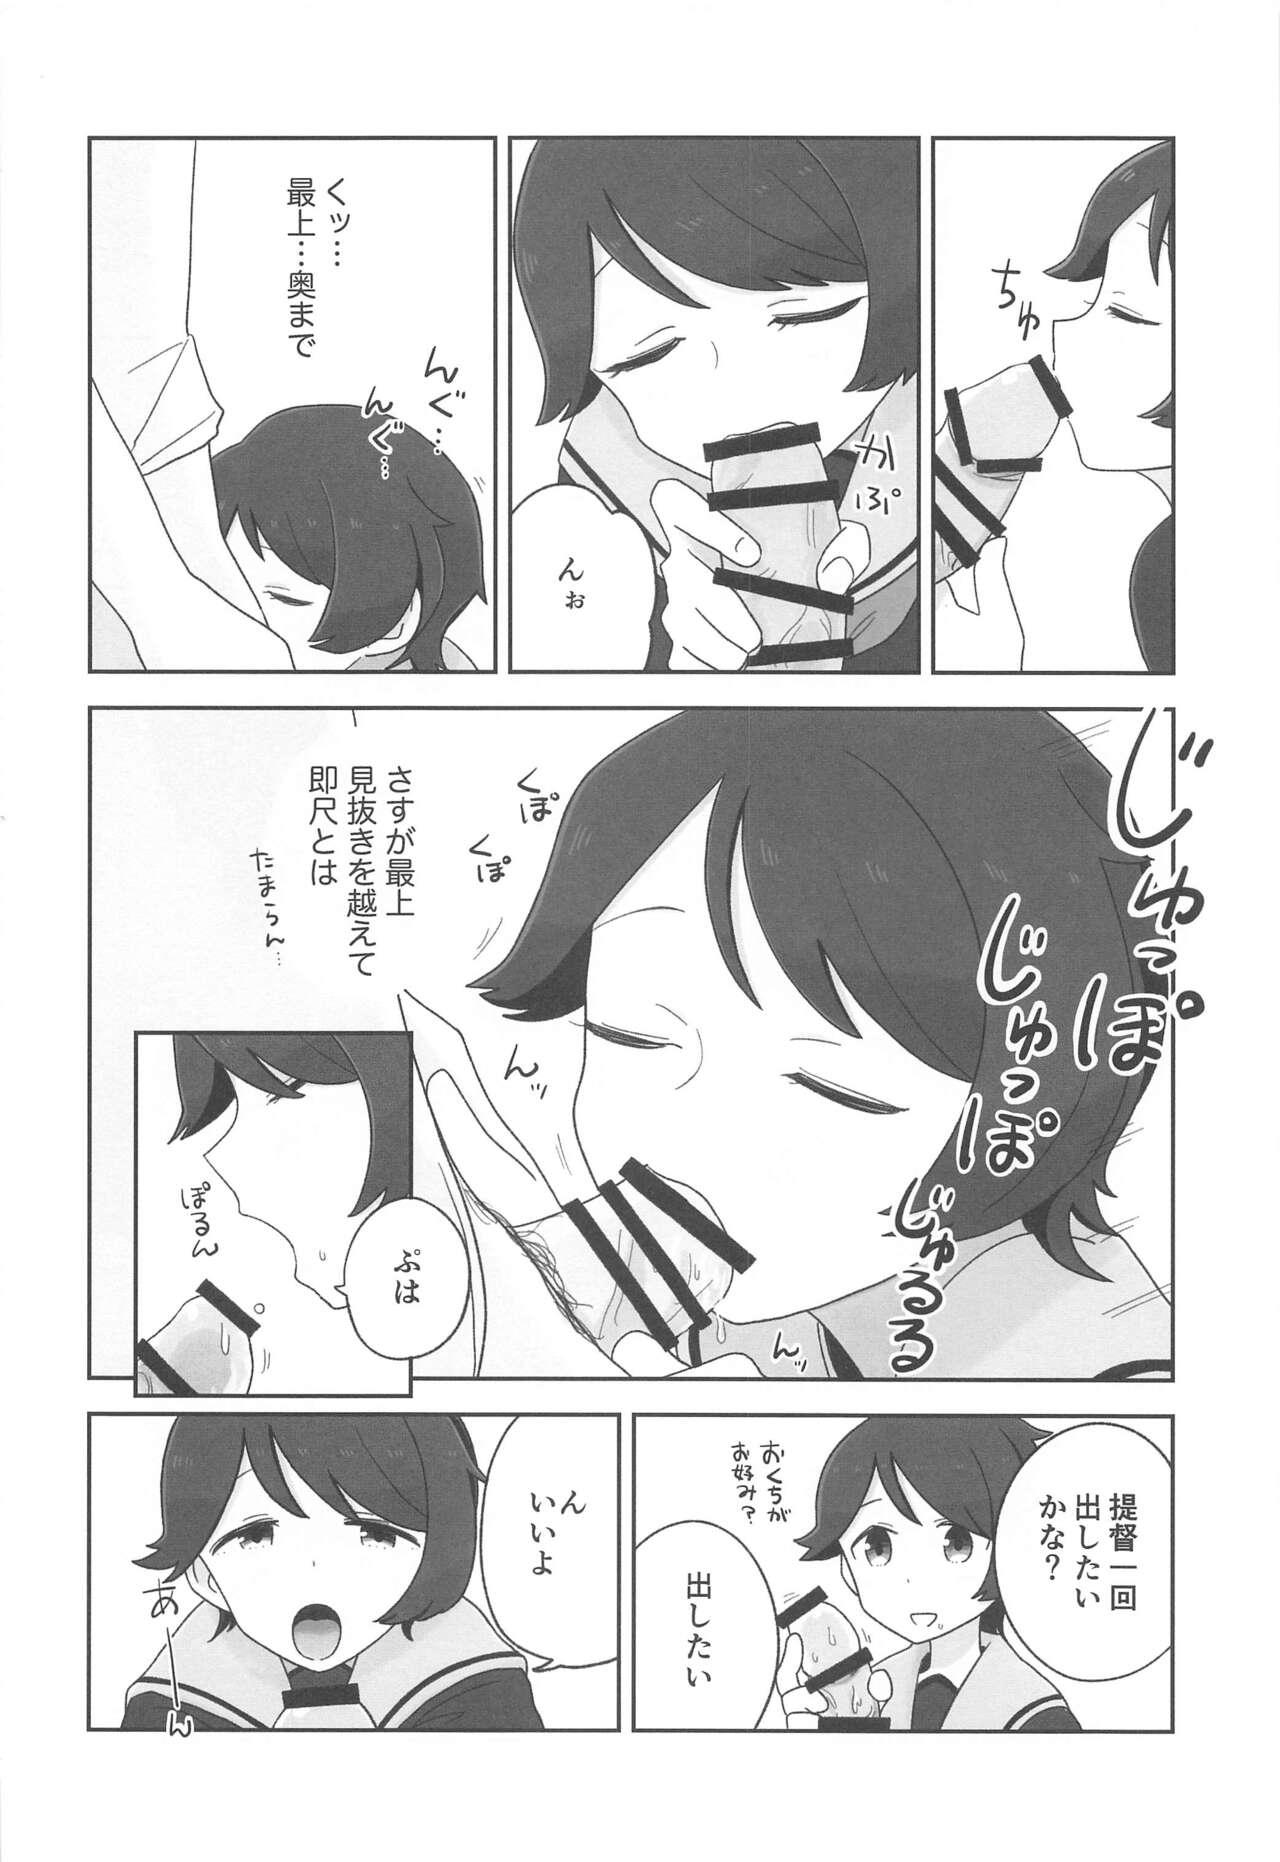 Gaycum Mogamix - Make love with Mogami. - Kantai collection Shaven - Page 3